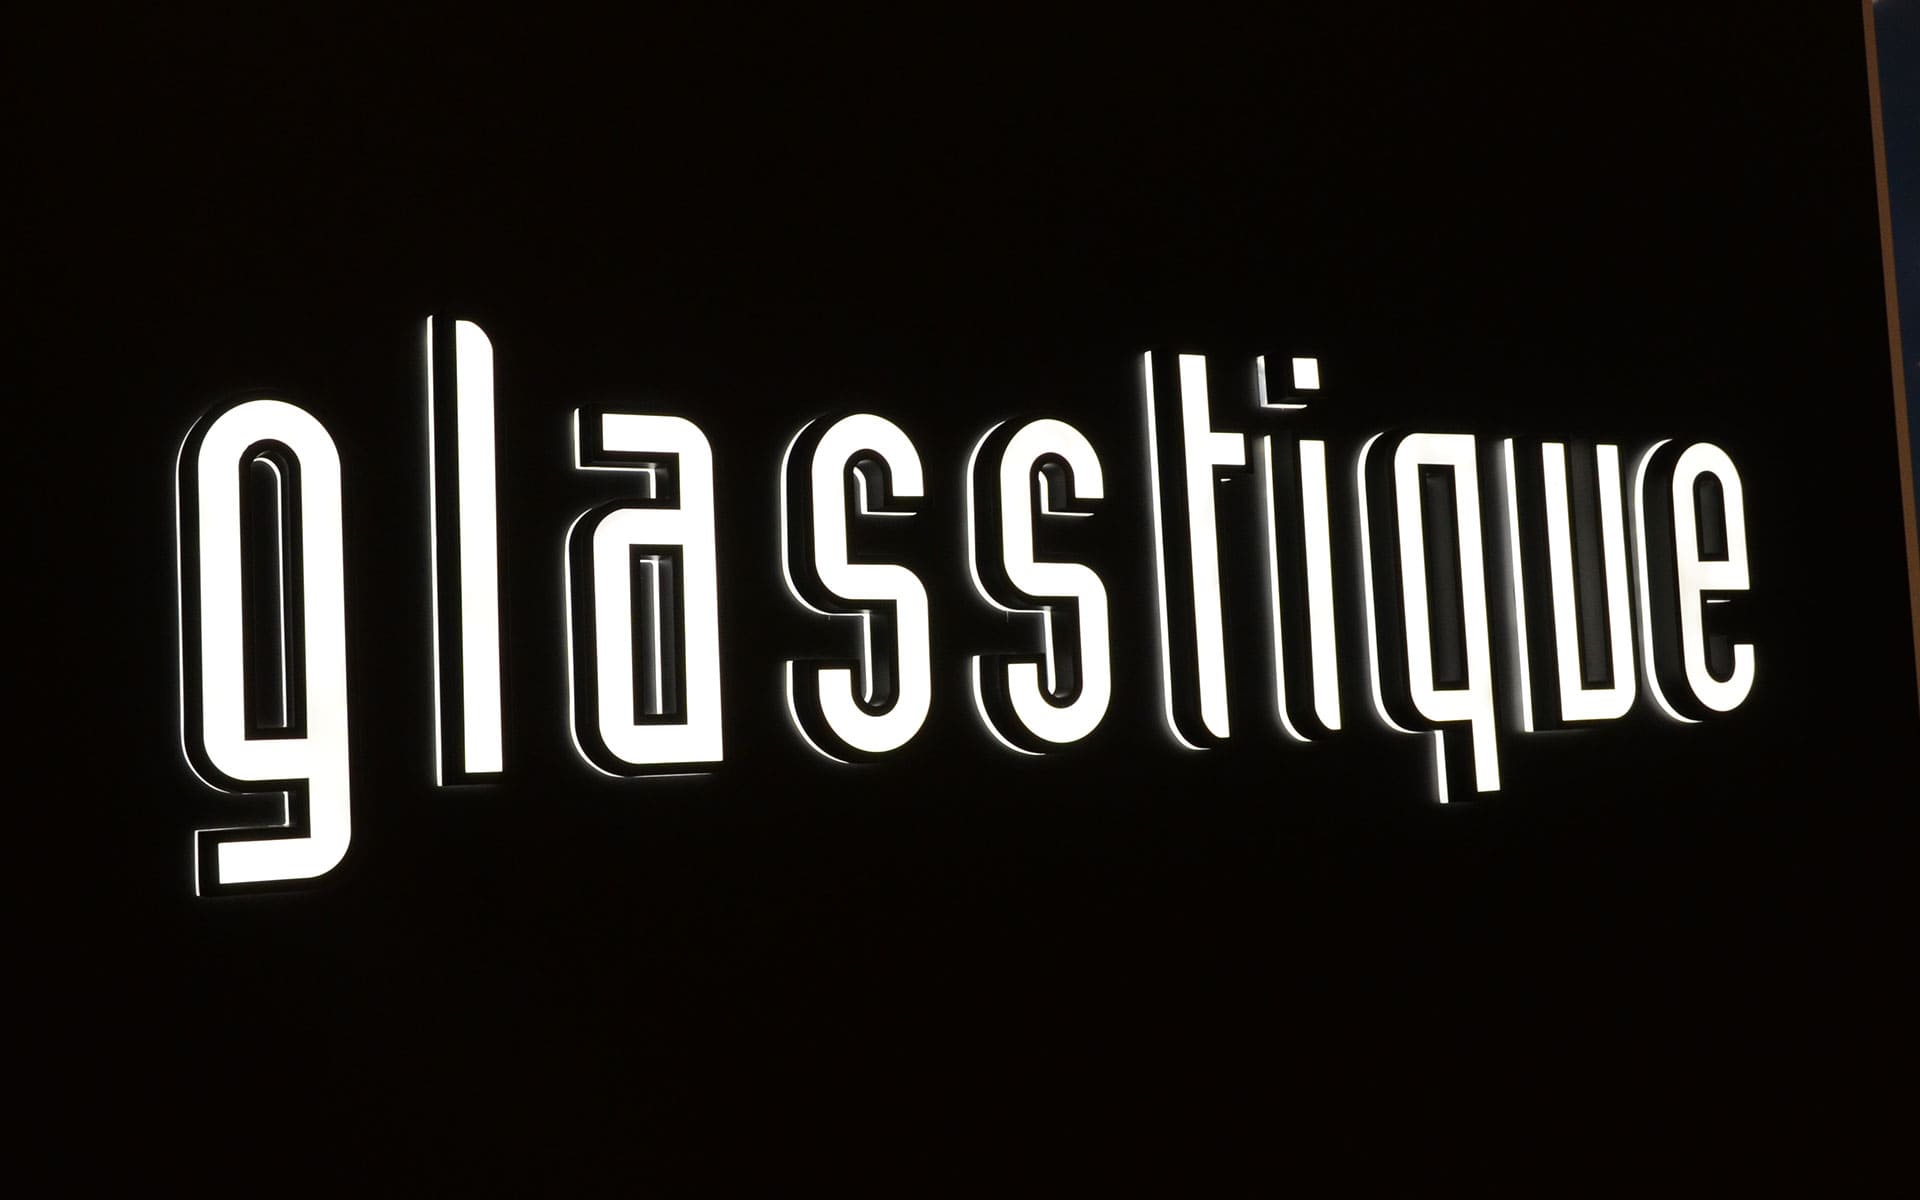 Face and Back-lit Acrylic Channel Letters for Glasstique